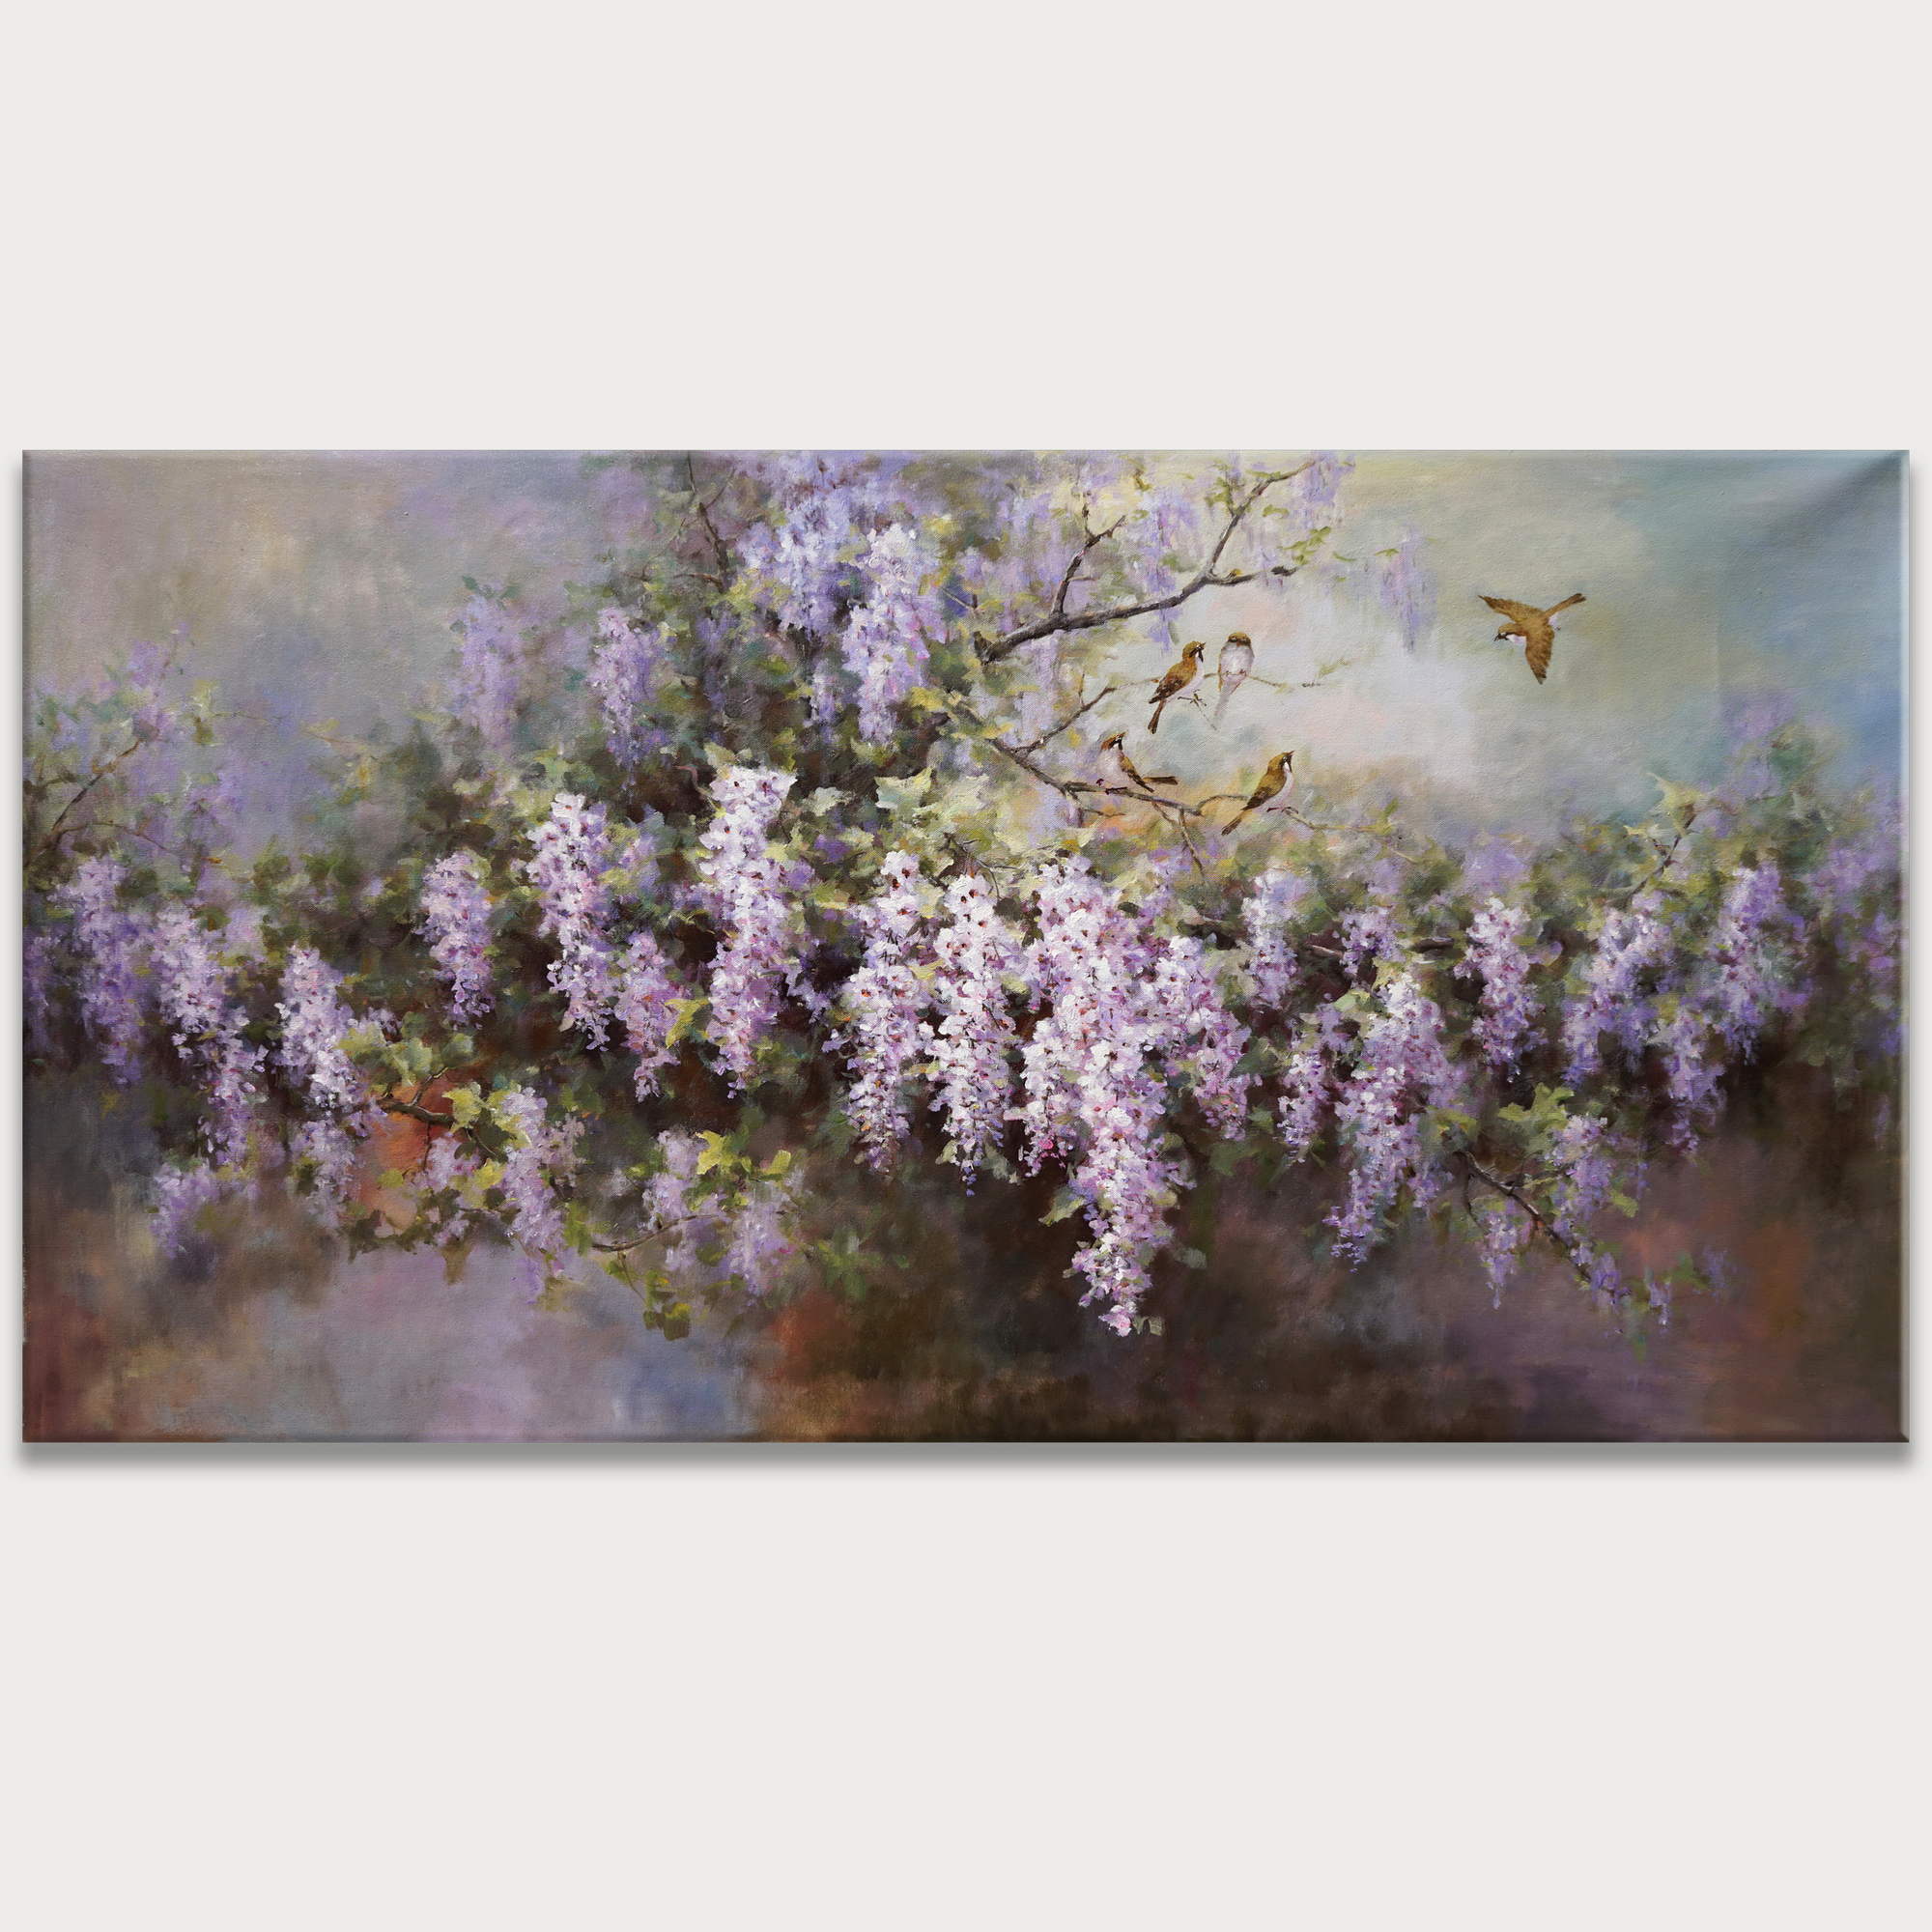 Hand painted Nature Wisteria in Bloom 90x180cm